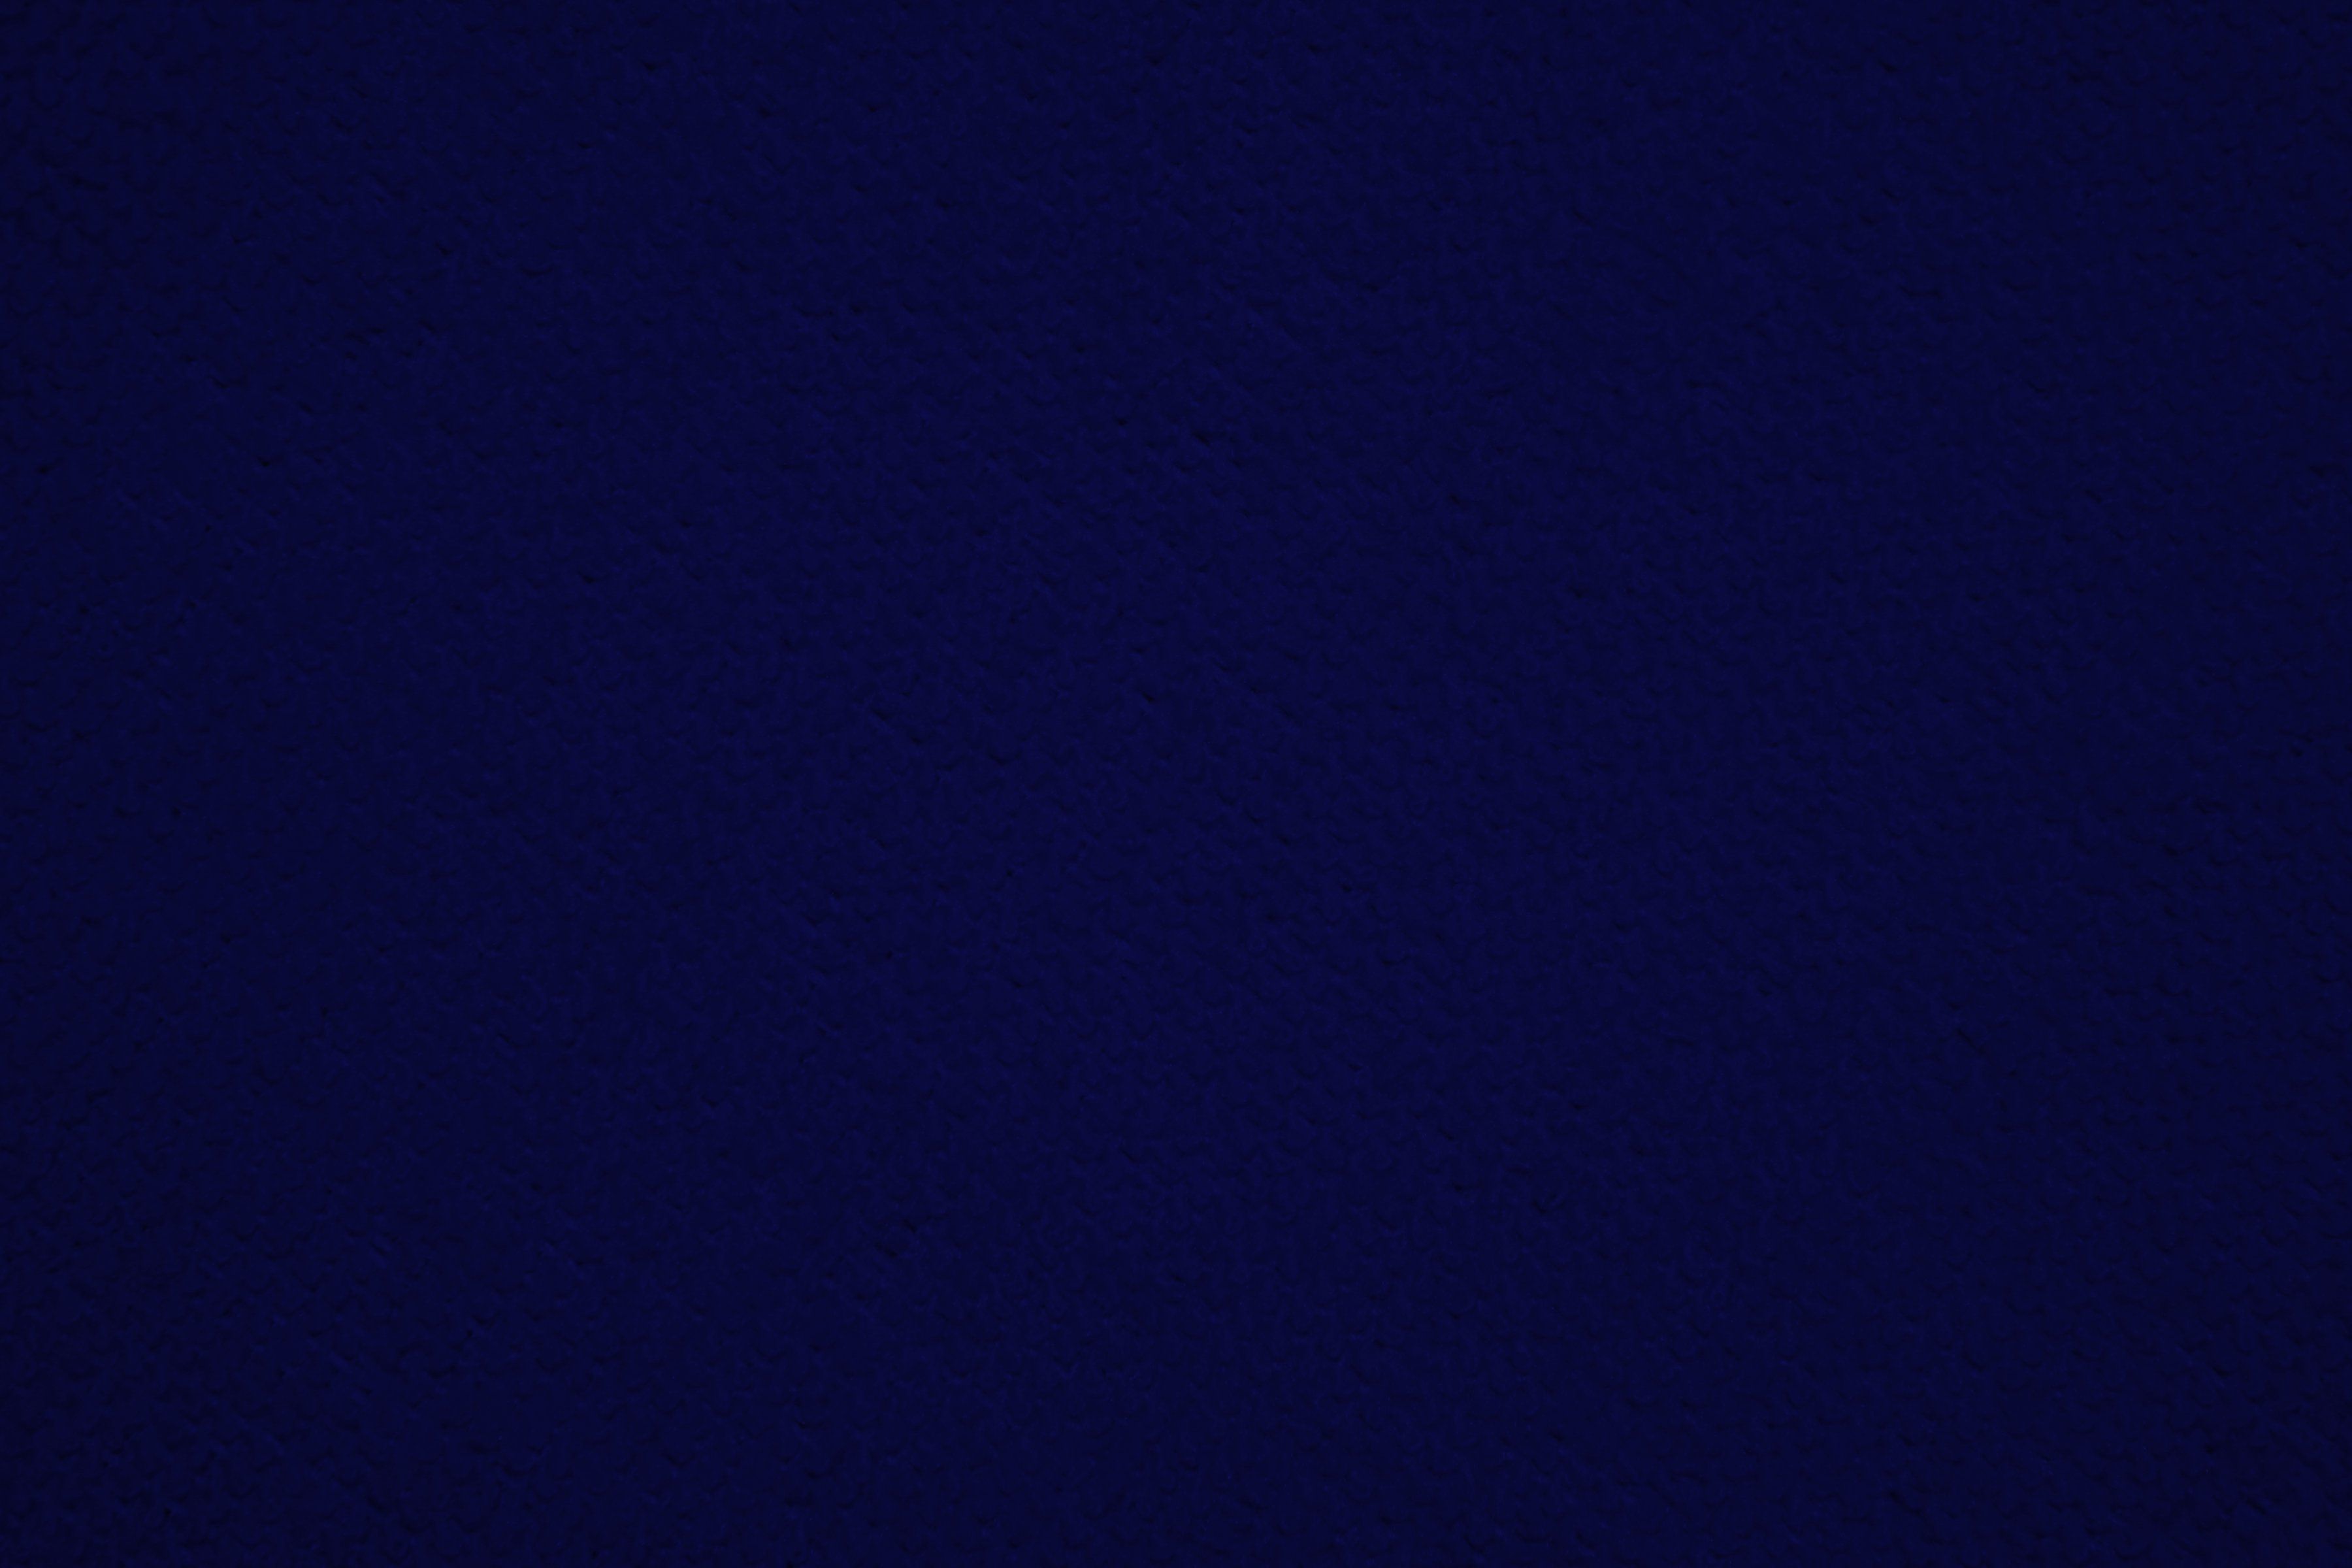 Wallpaper For Navy Blue And Gold